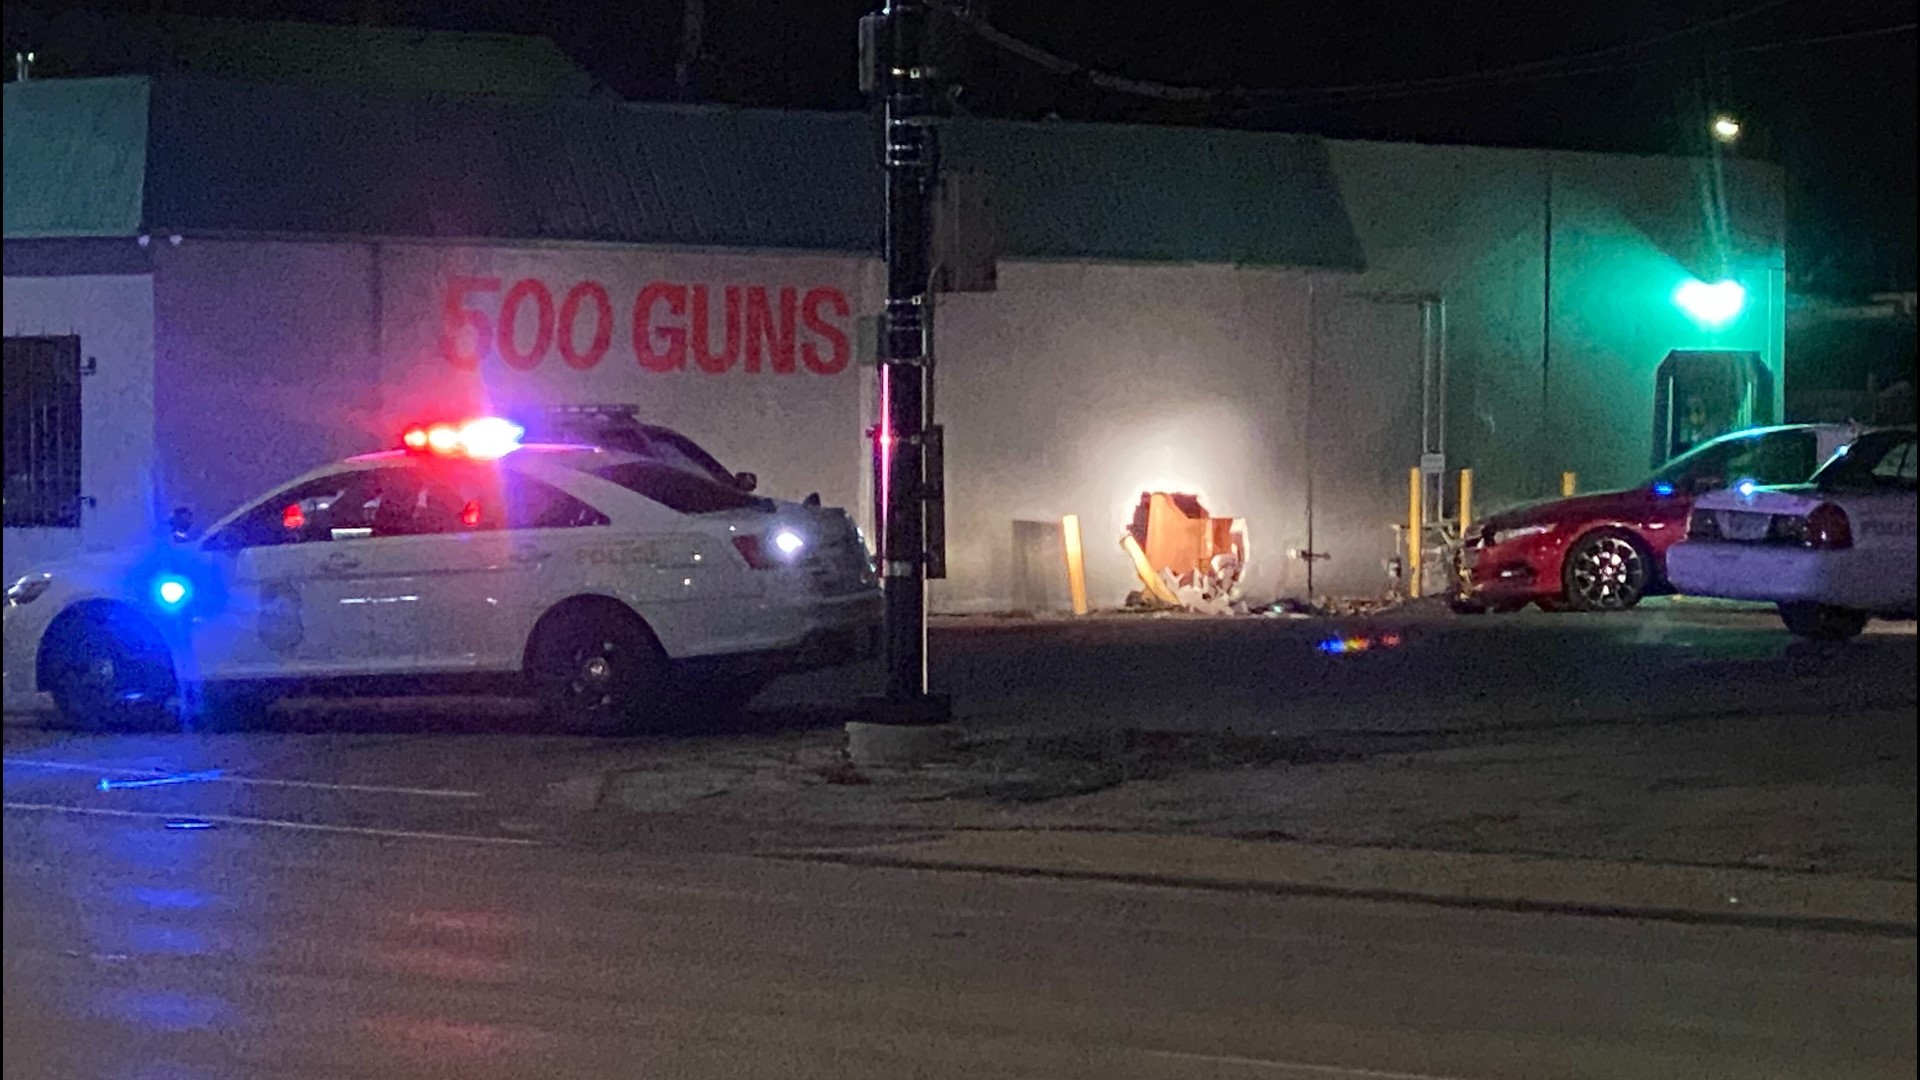 Police say a suspect stole several weapons after driving into the side of 500 guns on W. 16th Street.